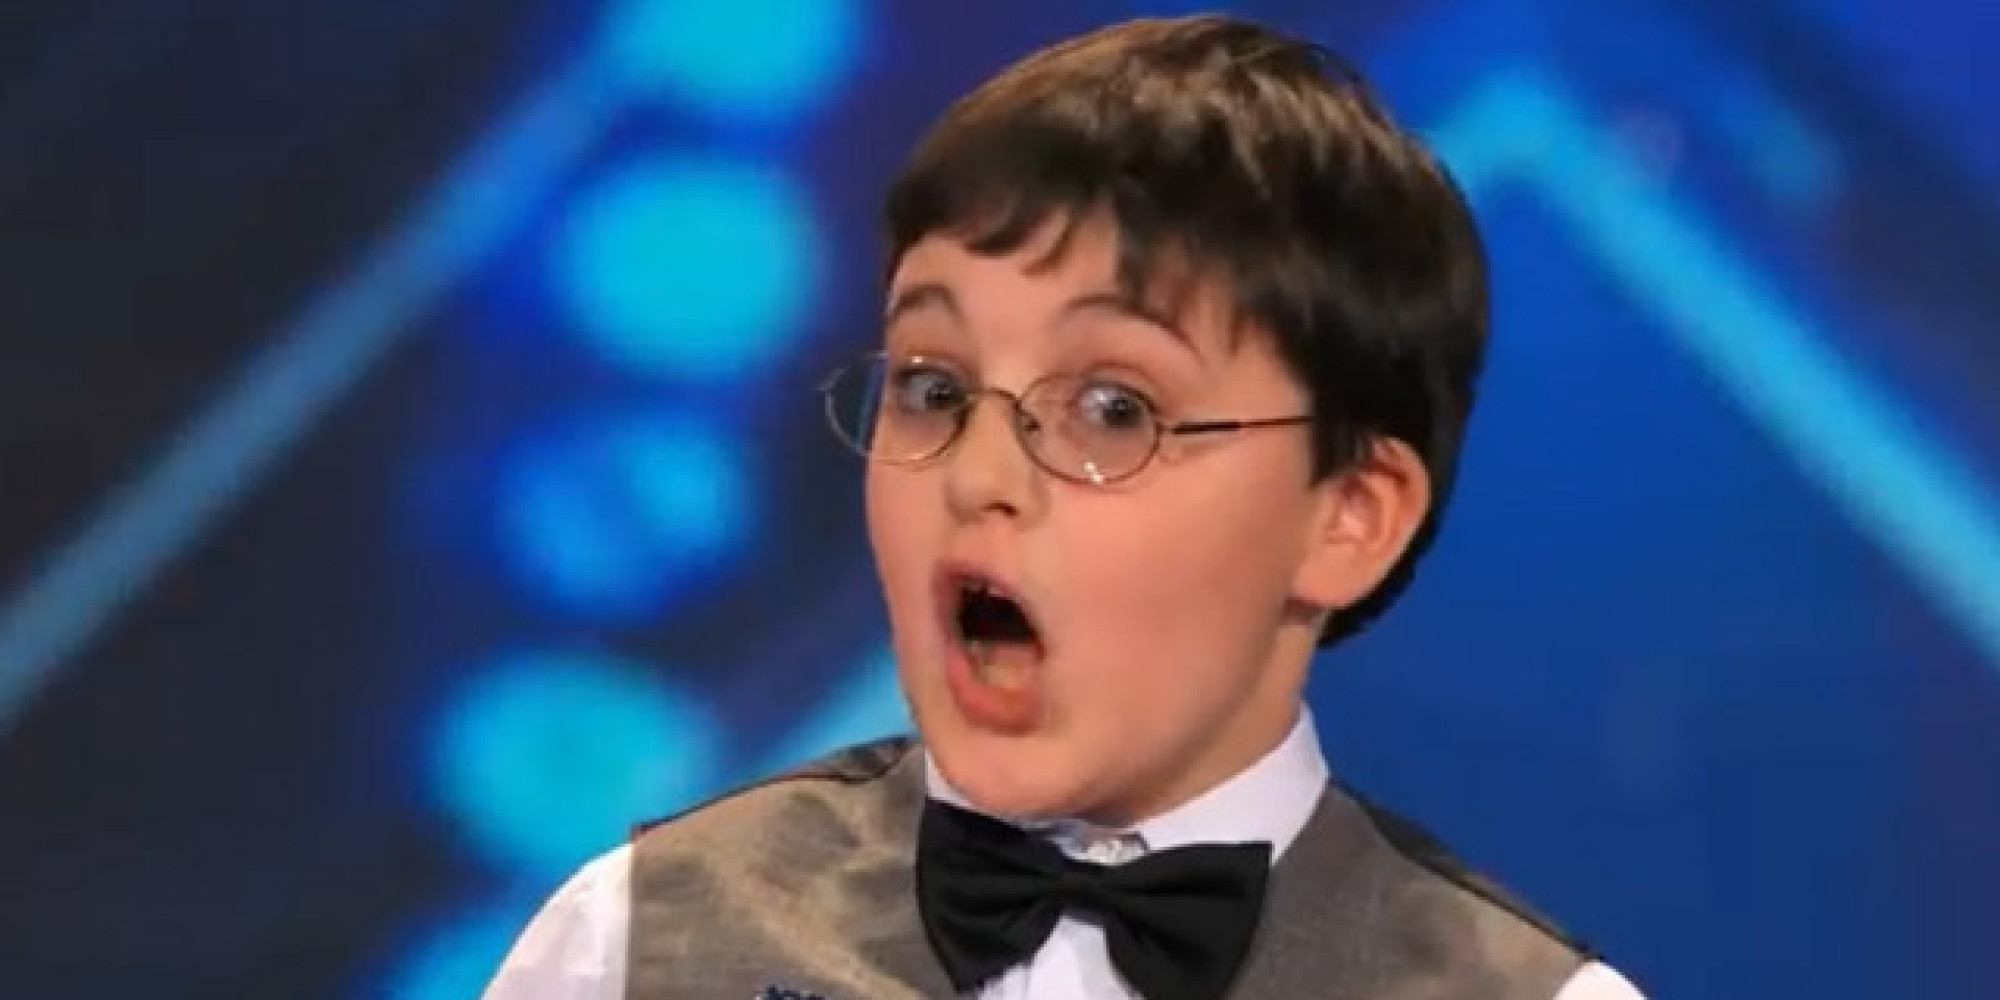 The 9-Year-Old Piano Prodigy on 'America's Got Talent' Is ...